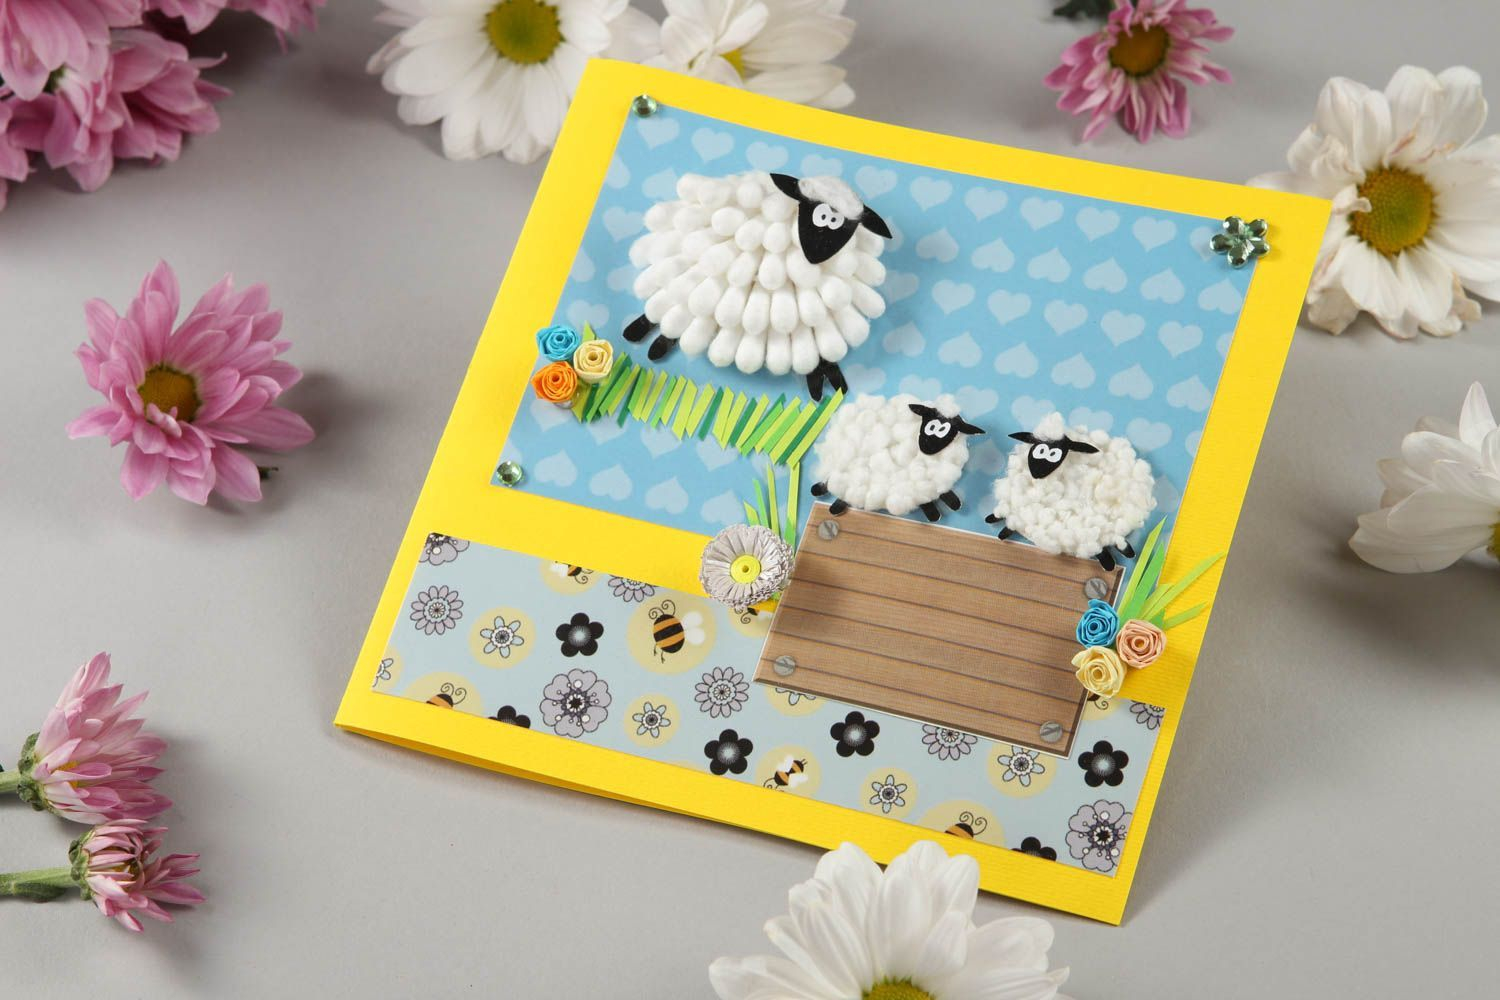 Scrapbooking Birthday Card Ideas Beautiful Handmade Greeting Card Scrapbooking Ideas Small Gifts For Kids